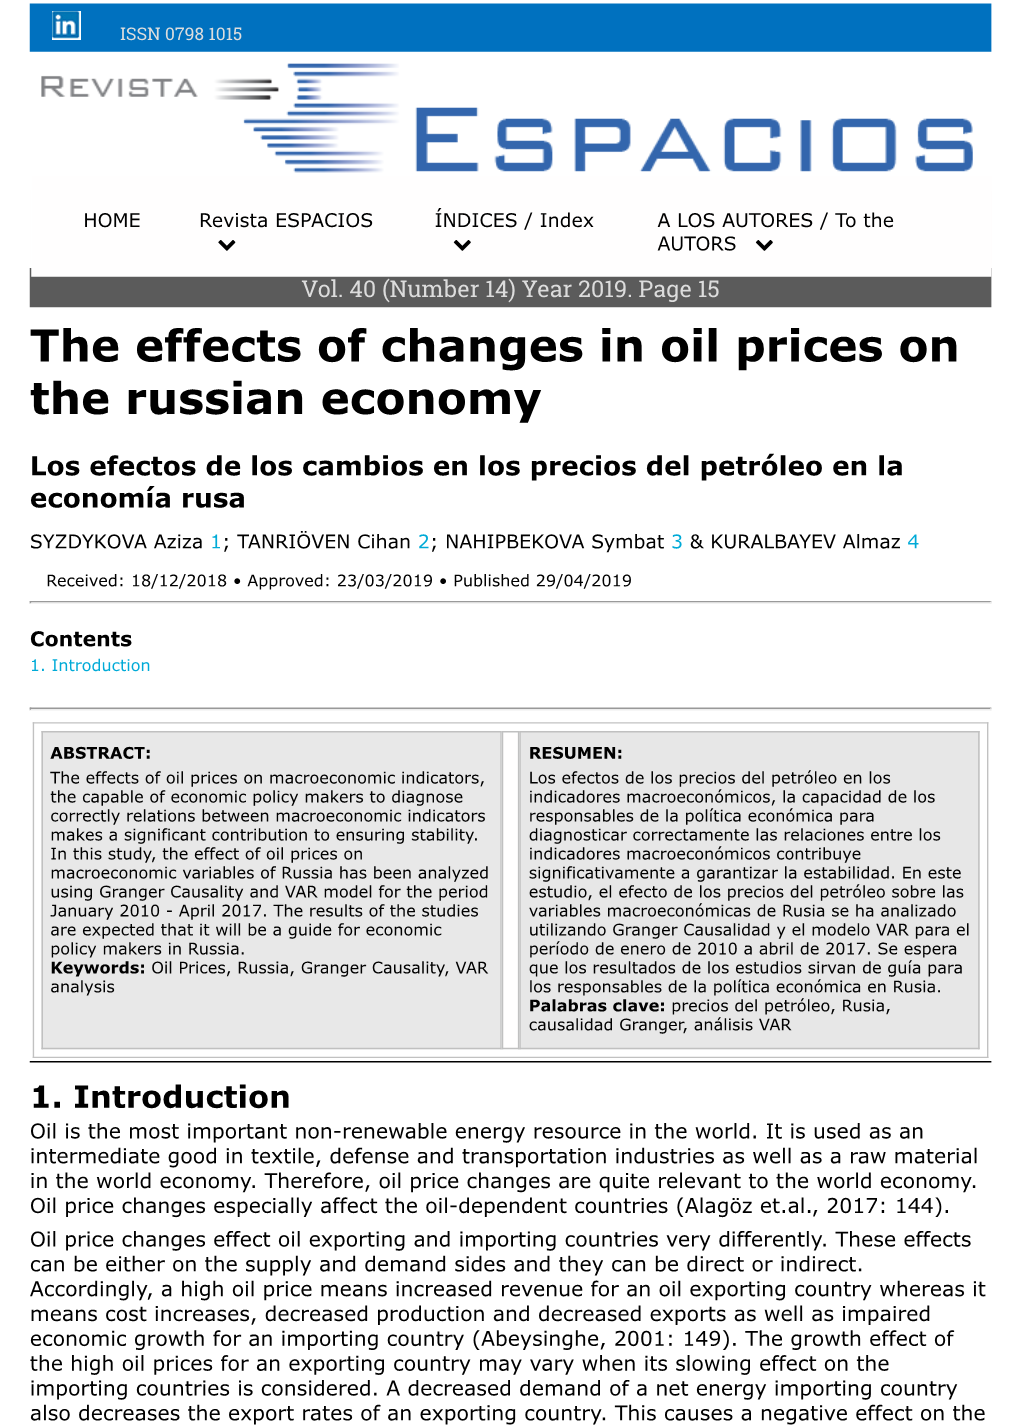 The Effects of Changes in Oil Prices on the Russian Economy